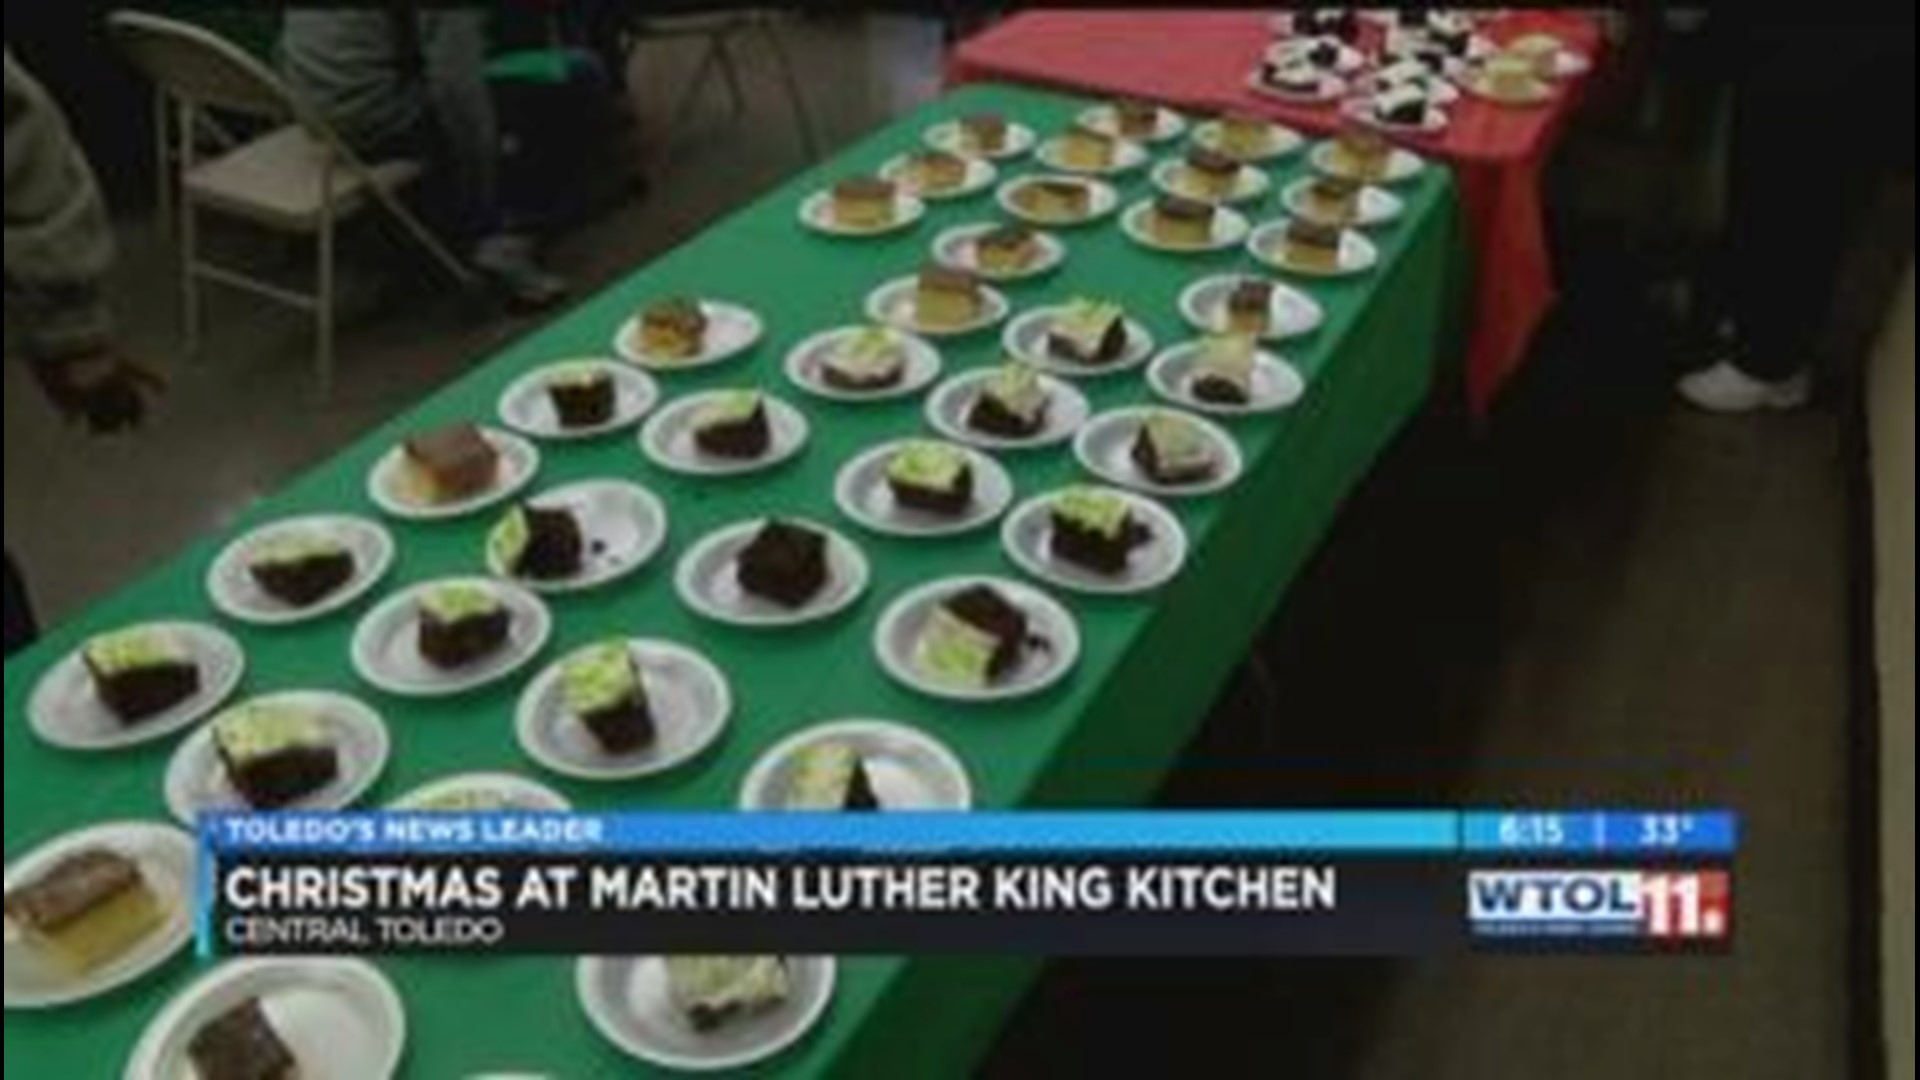 Martin Luther King Kitchen for the Poor serves more than food at annual Christmas party